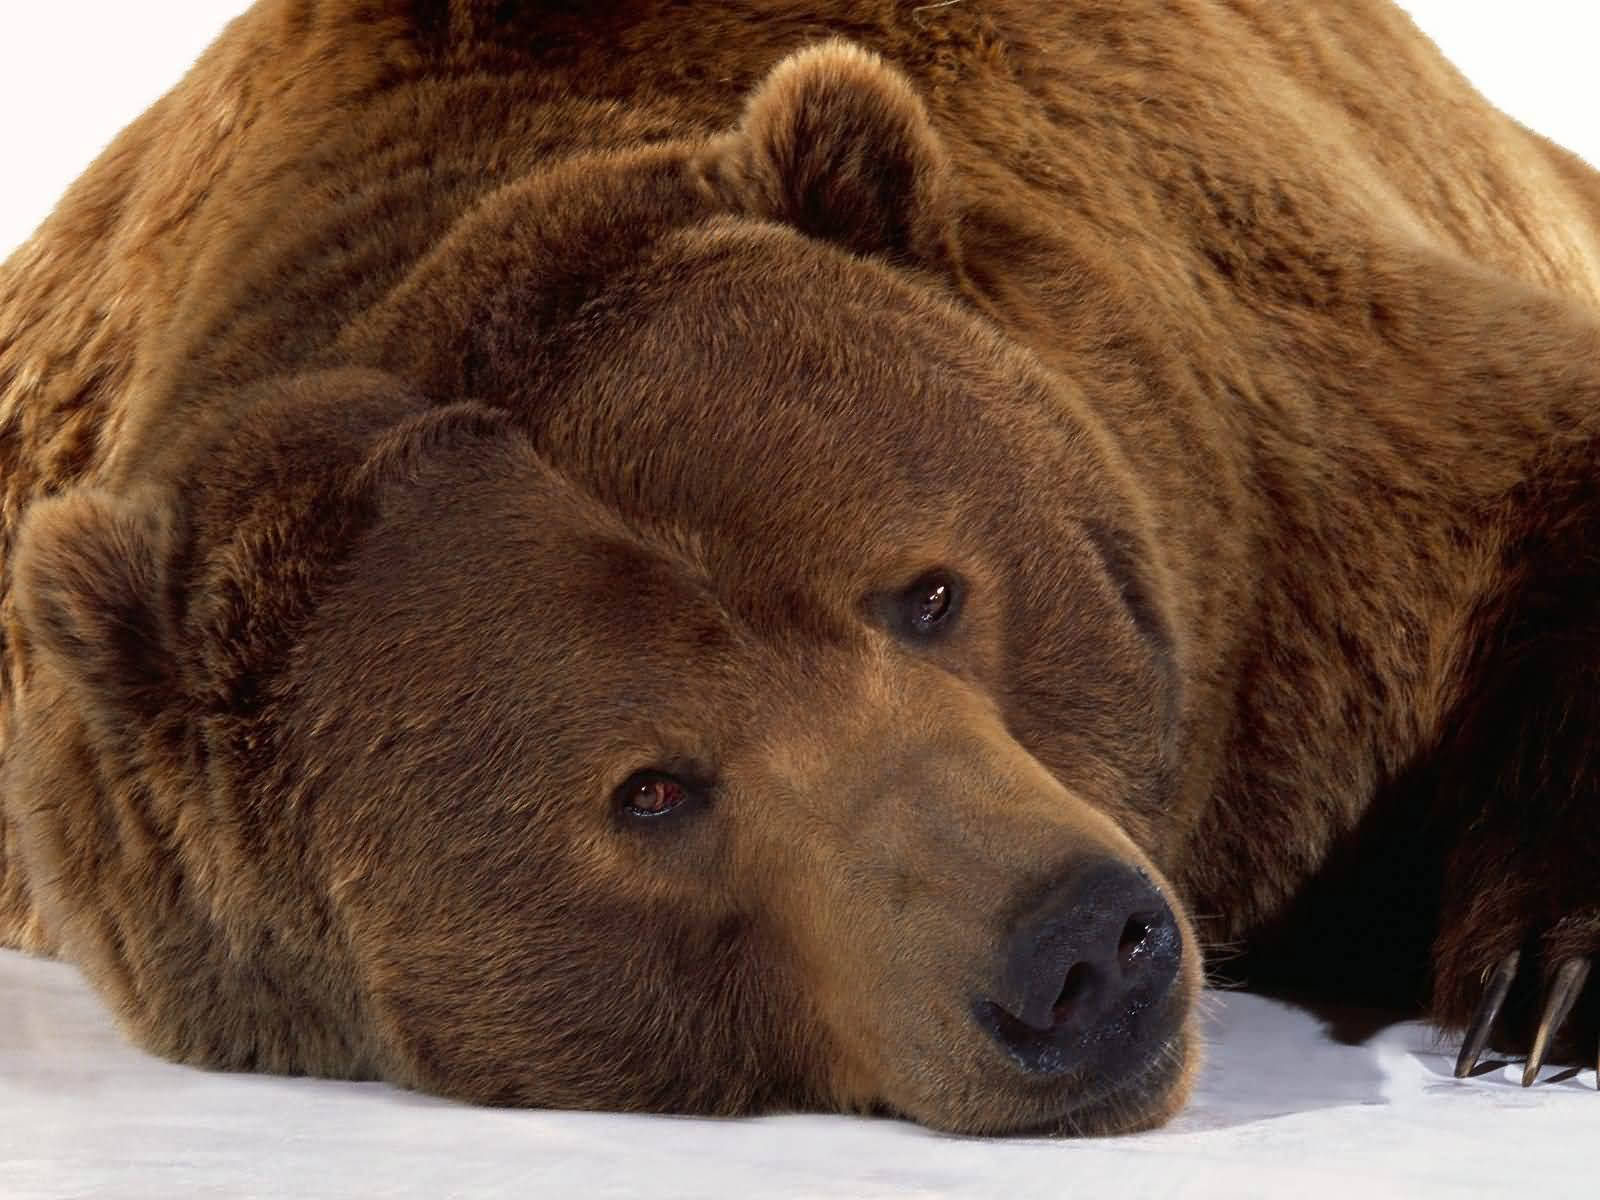 A Close-up Photograph of a Grizzly Bear Wallpaper